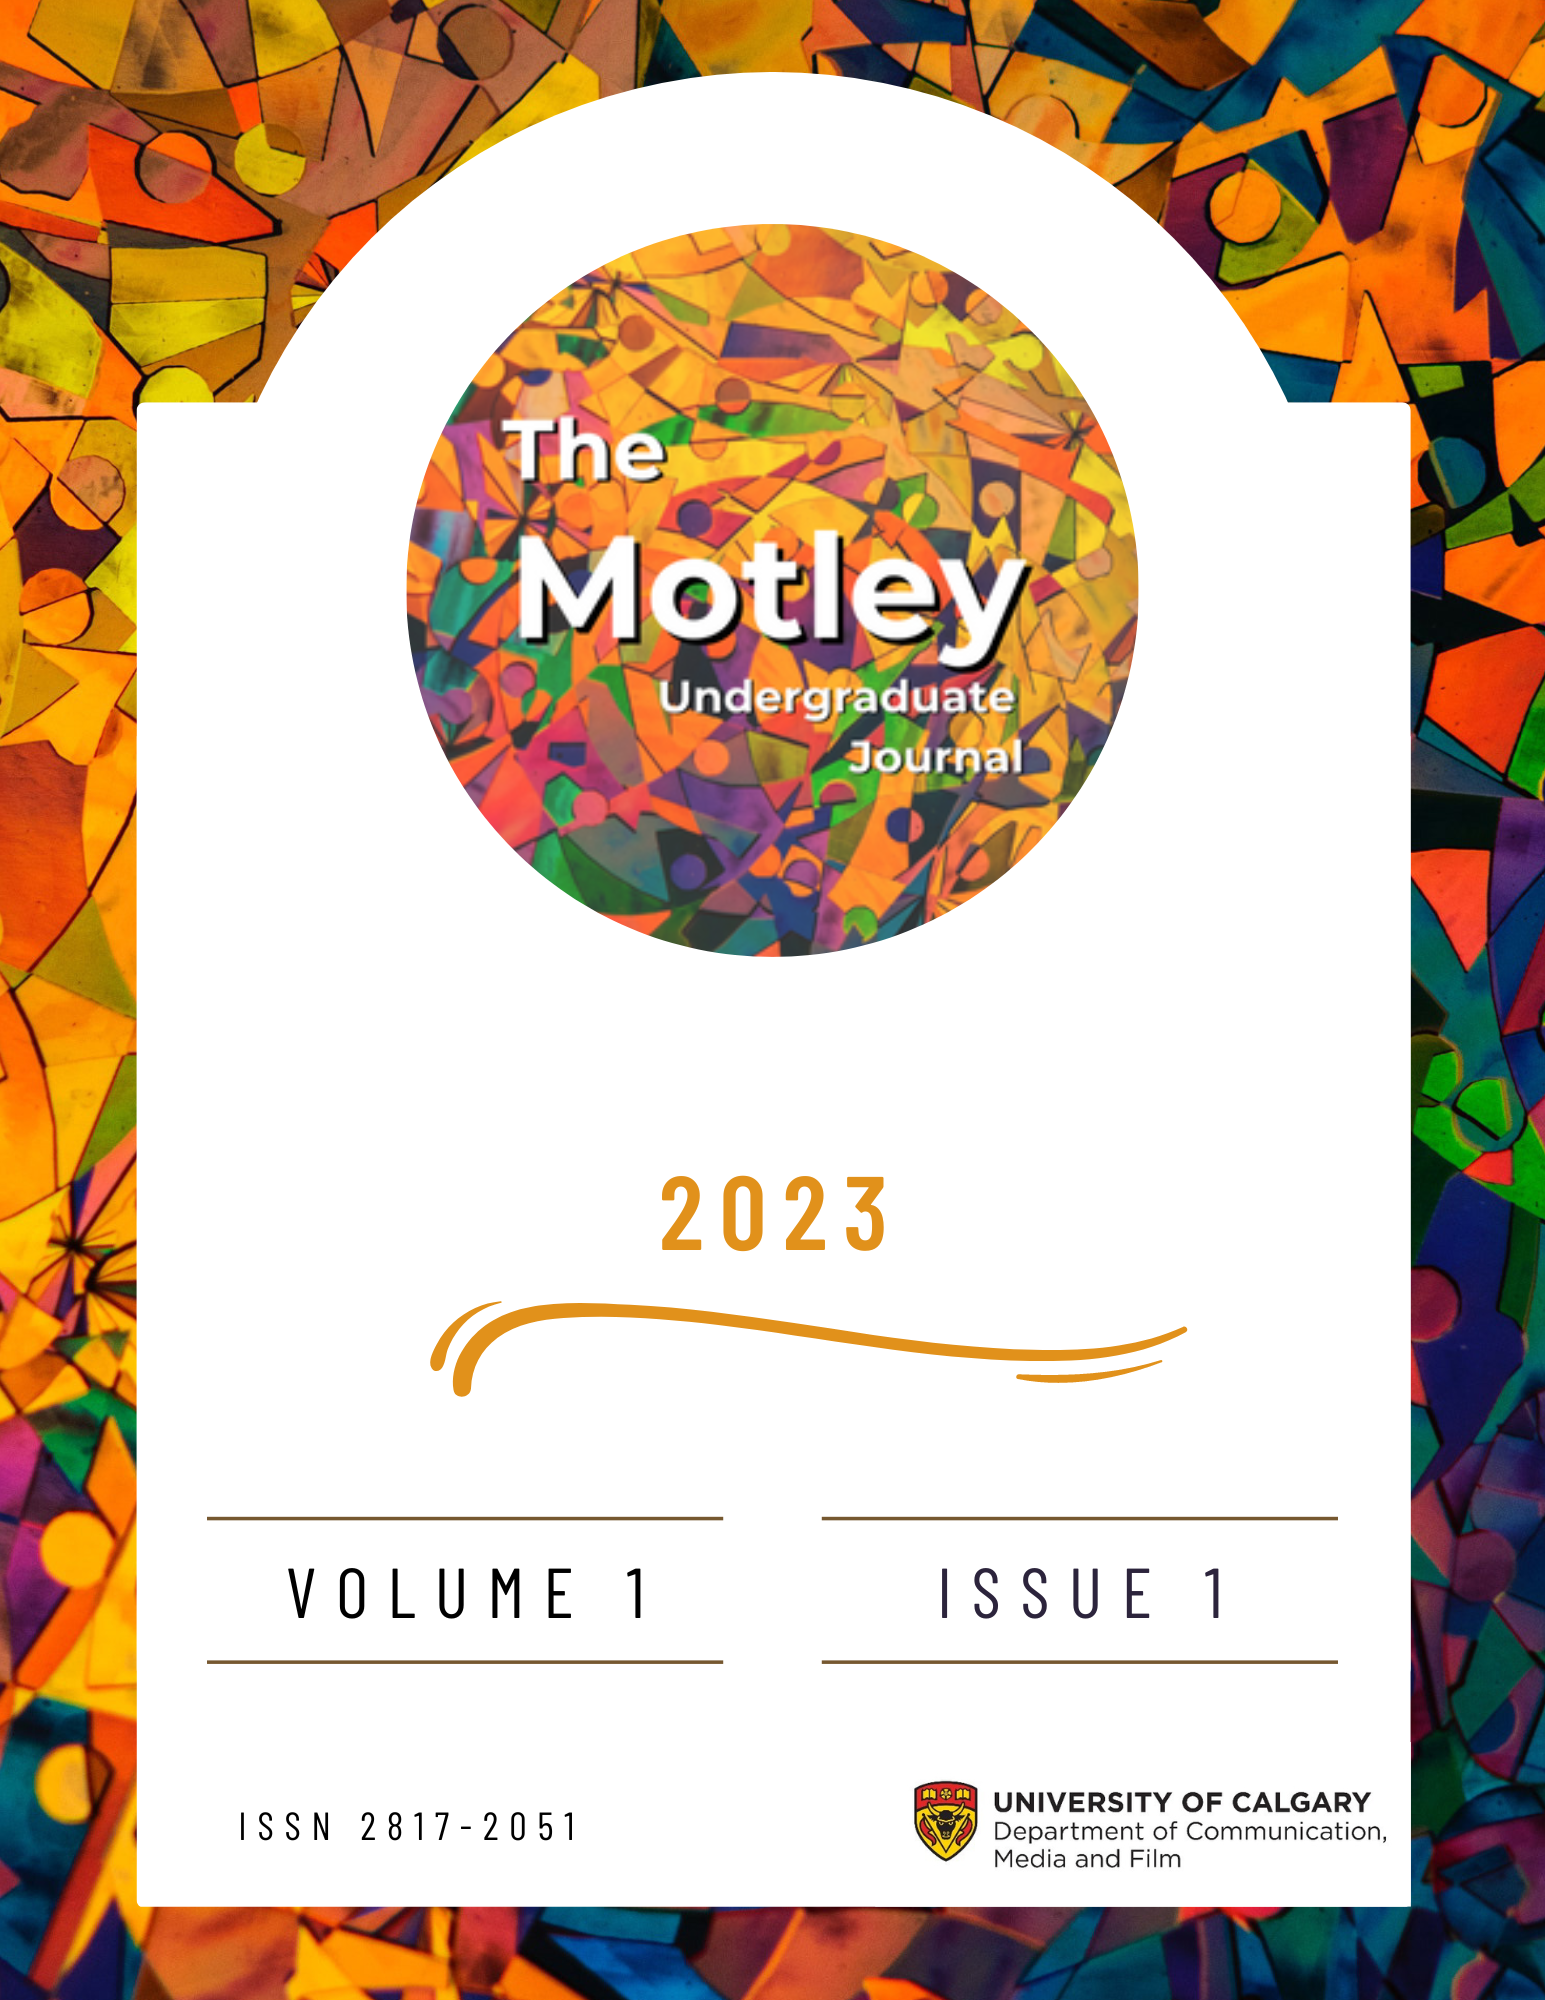 The cover of The Motley Undergraduate Journal, text reads 2023, Volume 1, Issue 1, ISSN 2817-2051, University of Calgary Department of Communication Media, and Films Studies